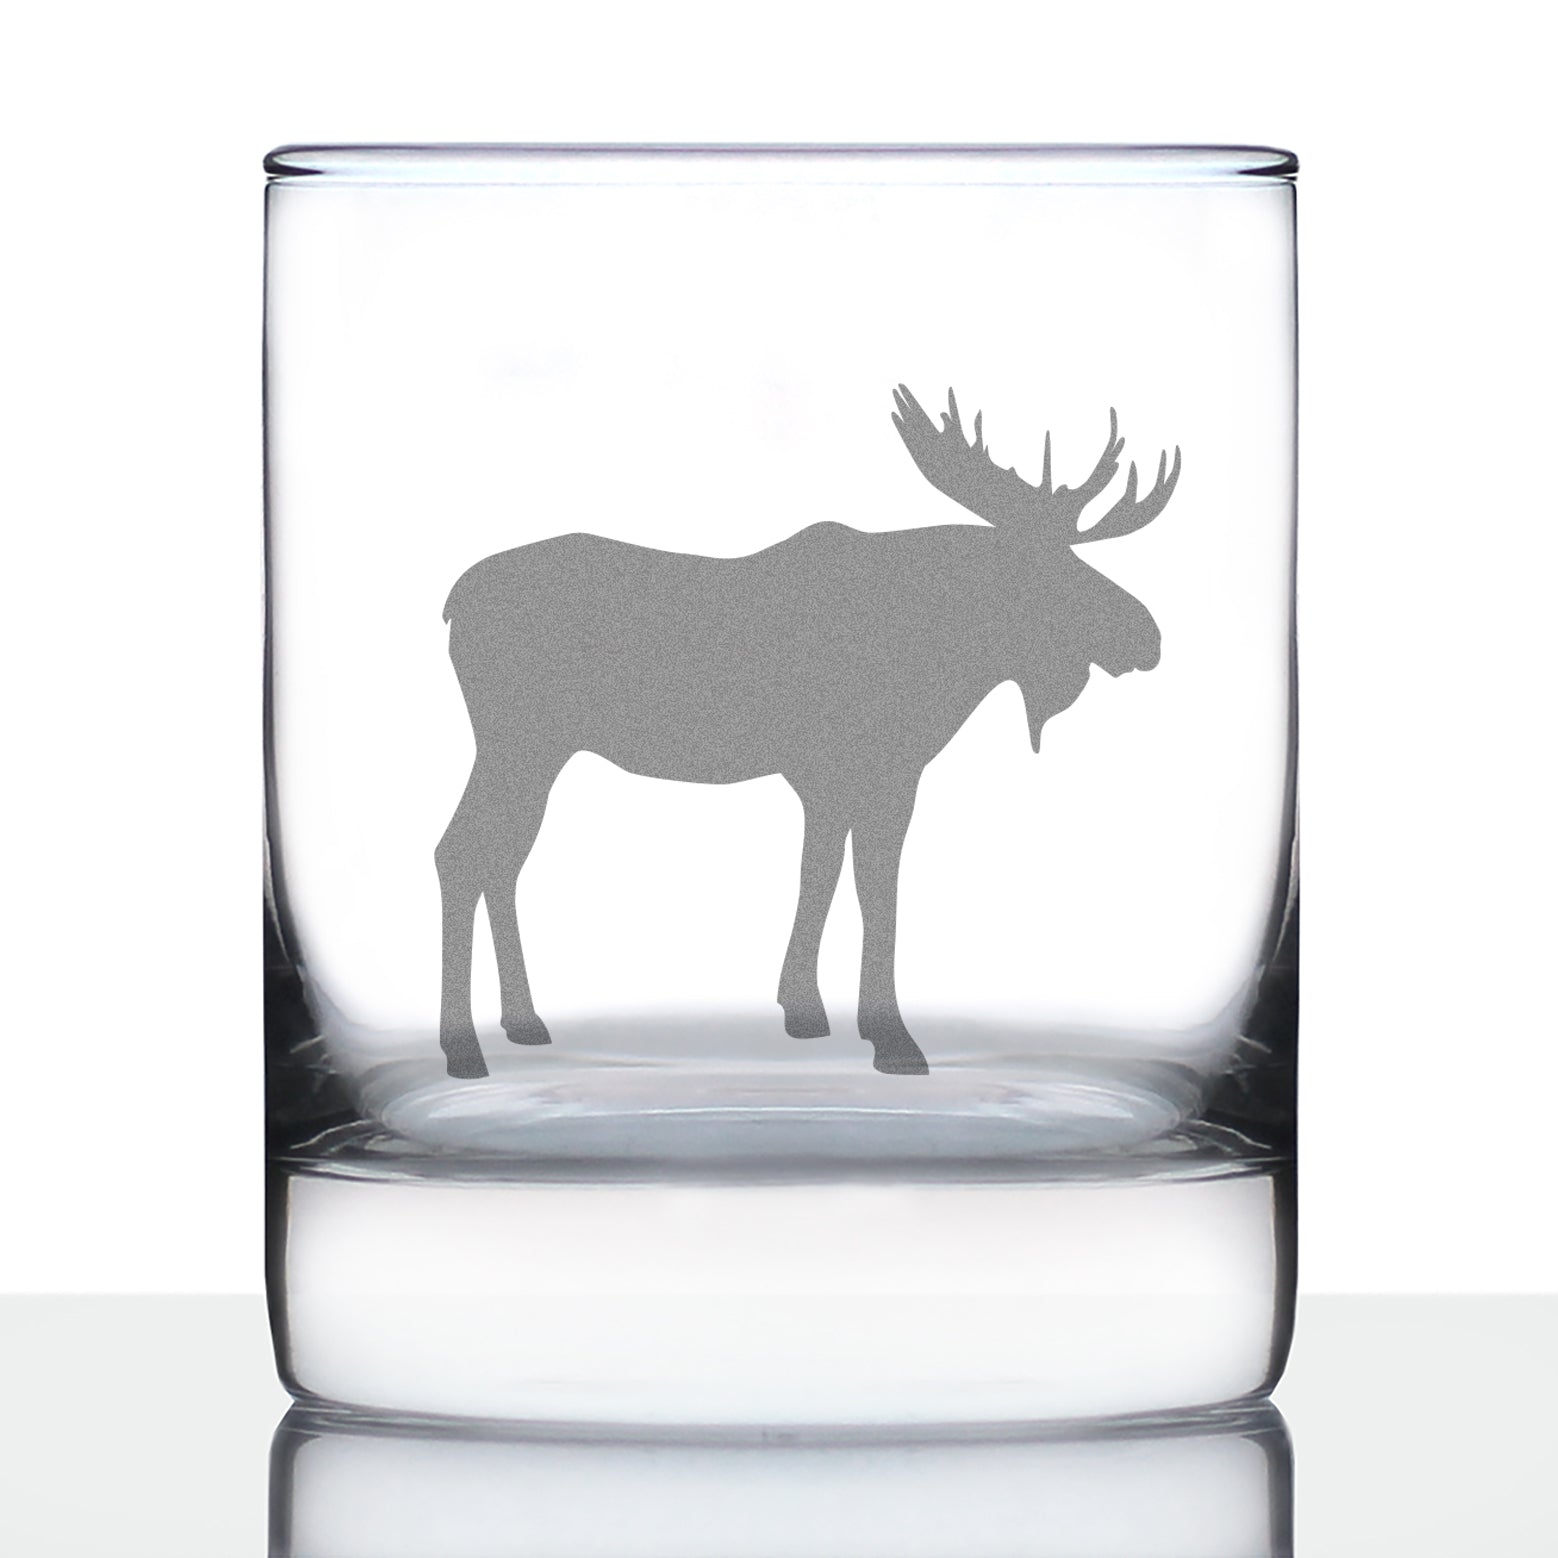 Moose Whiskey Rocks Glass - Cabin Themed Gifts or Rustic Decor for Men and Women - Fun Whisky Drinking Tumbler - 10 oz